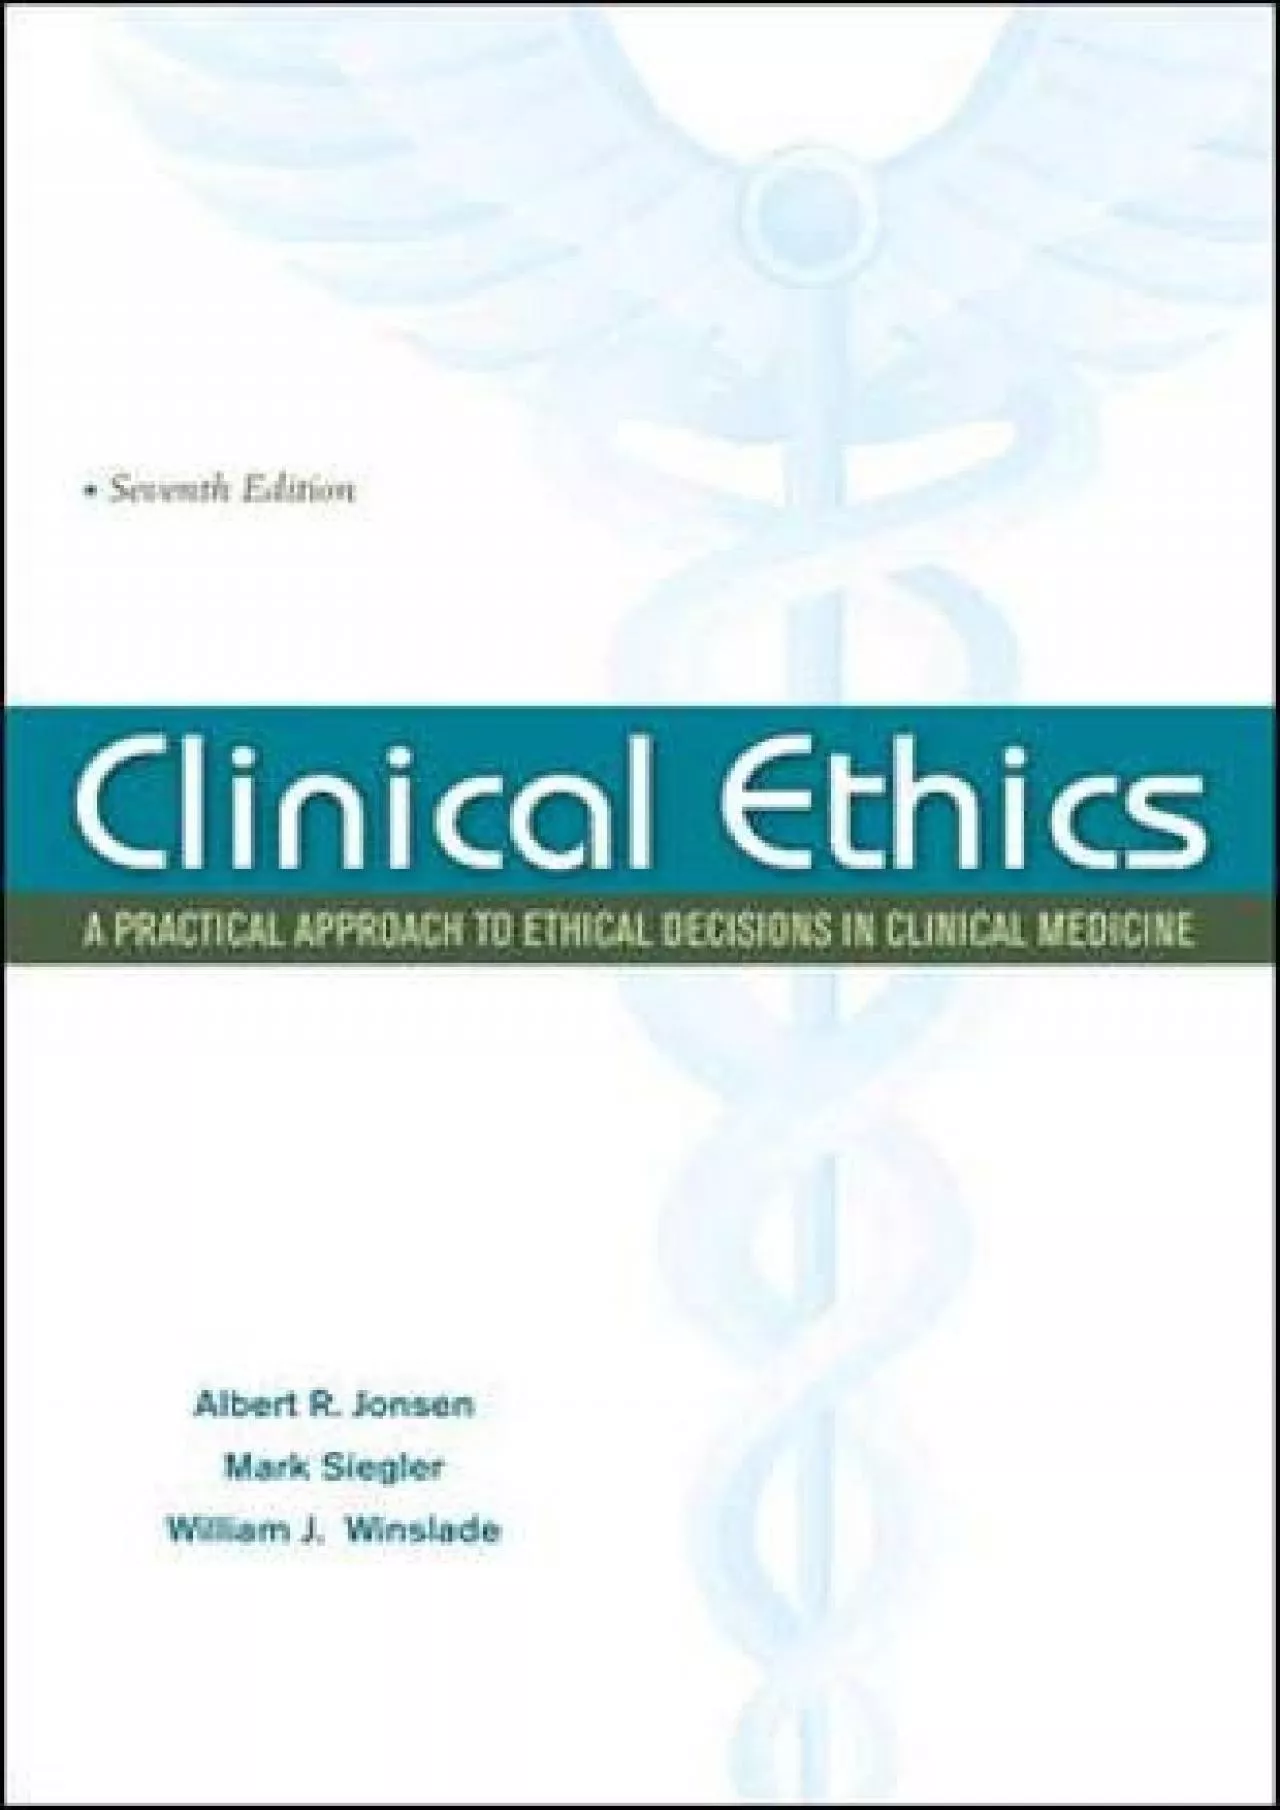 (DOWNLOAD)-Clinical Ethics: A Practical Approach to Ethical Decisions in Clinical Medicine,